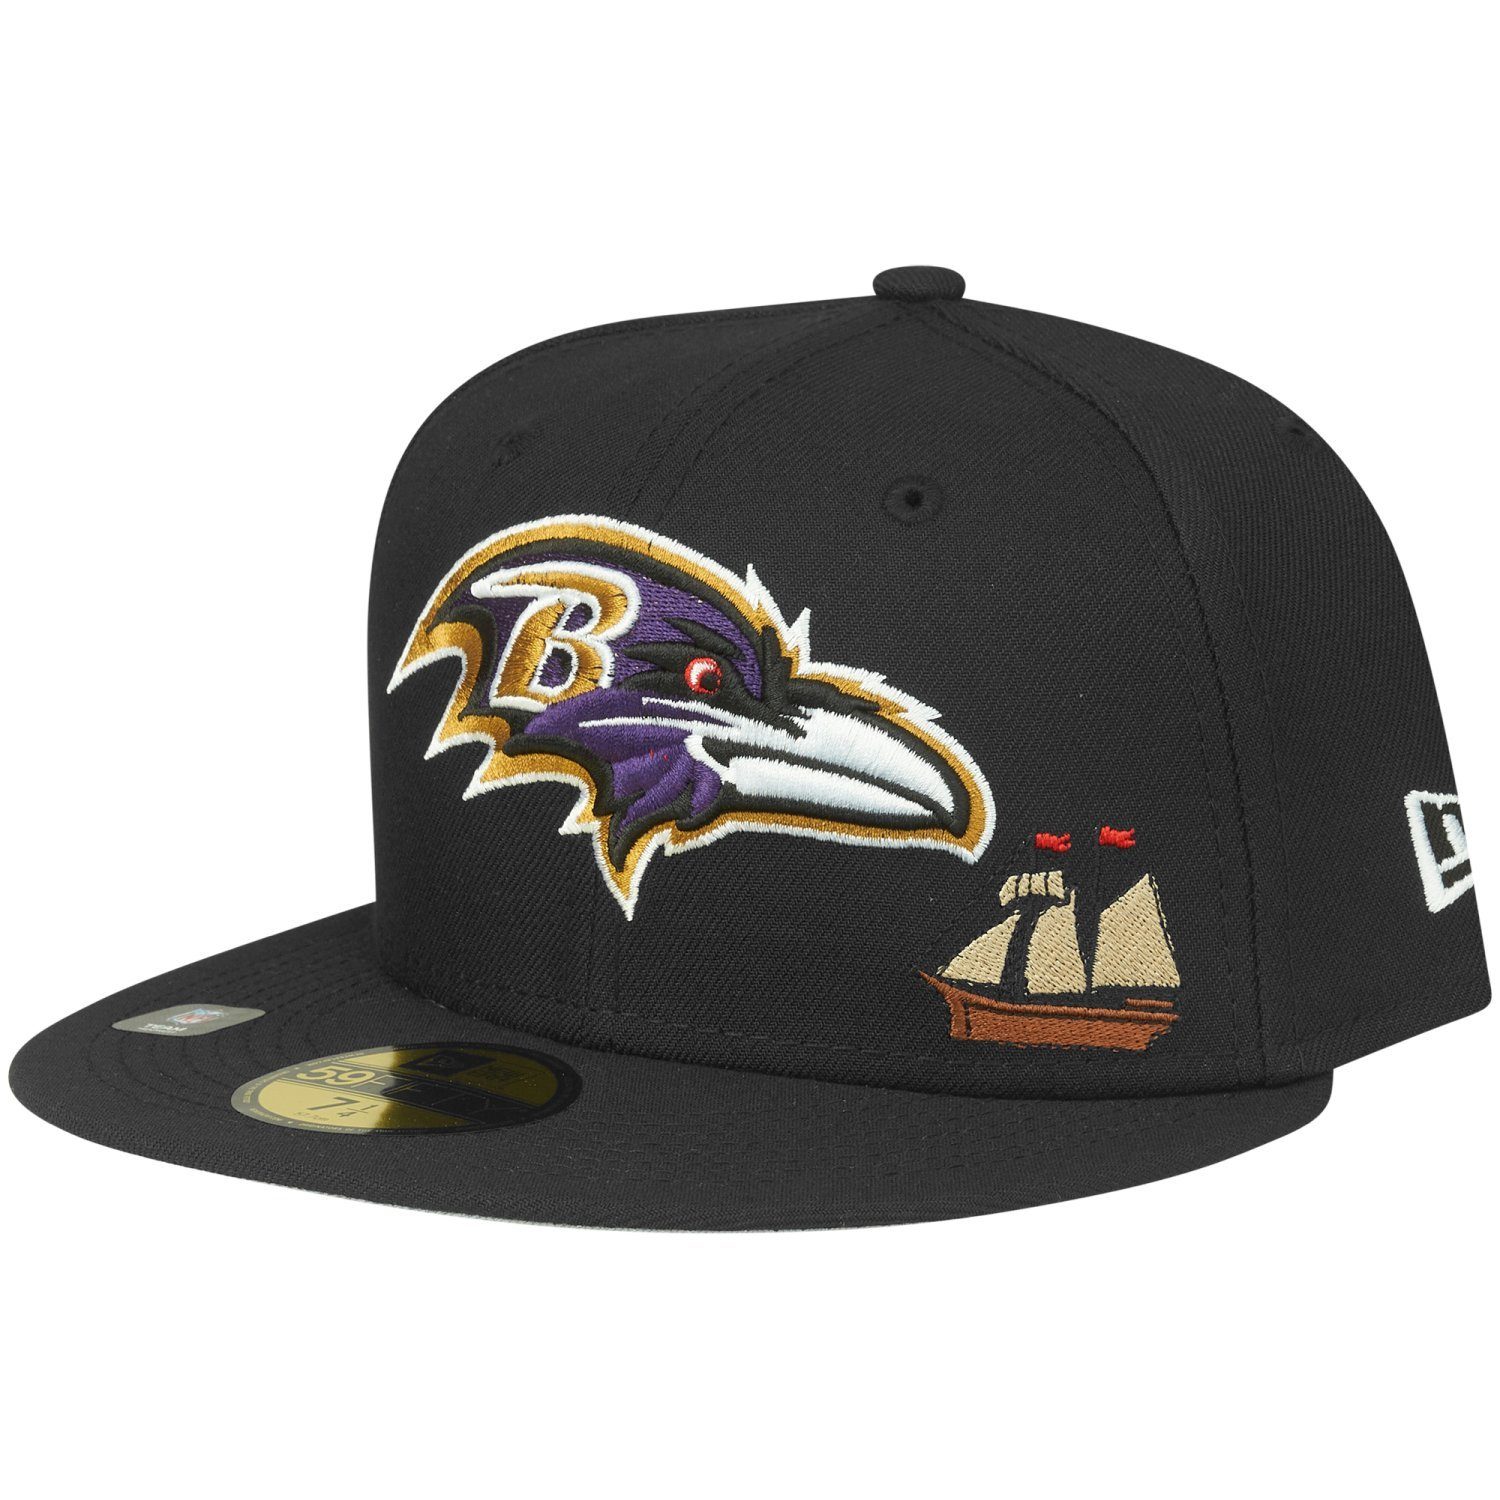 New Era Fitted Cap 59Fifty NFL CITY Baltimore Ravens